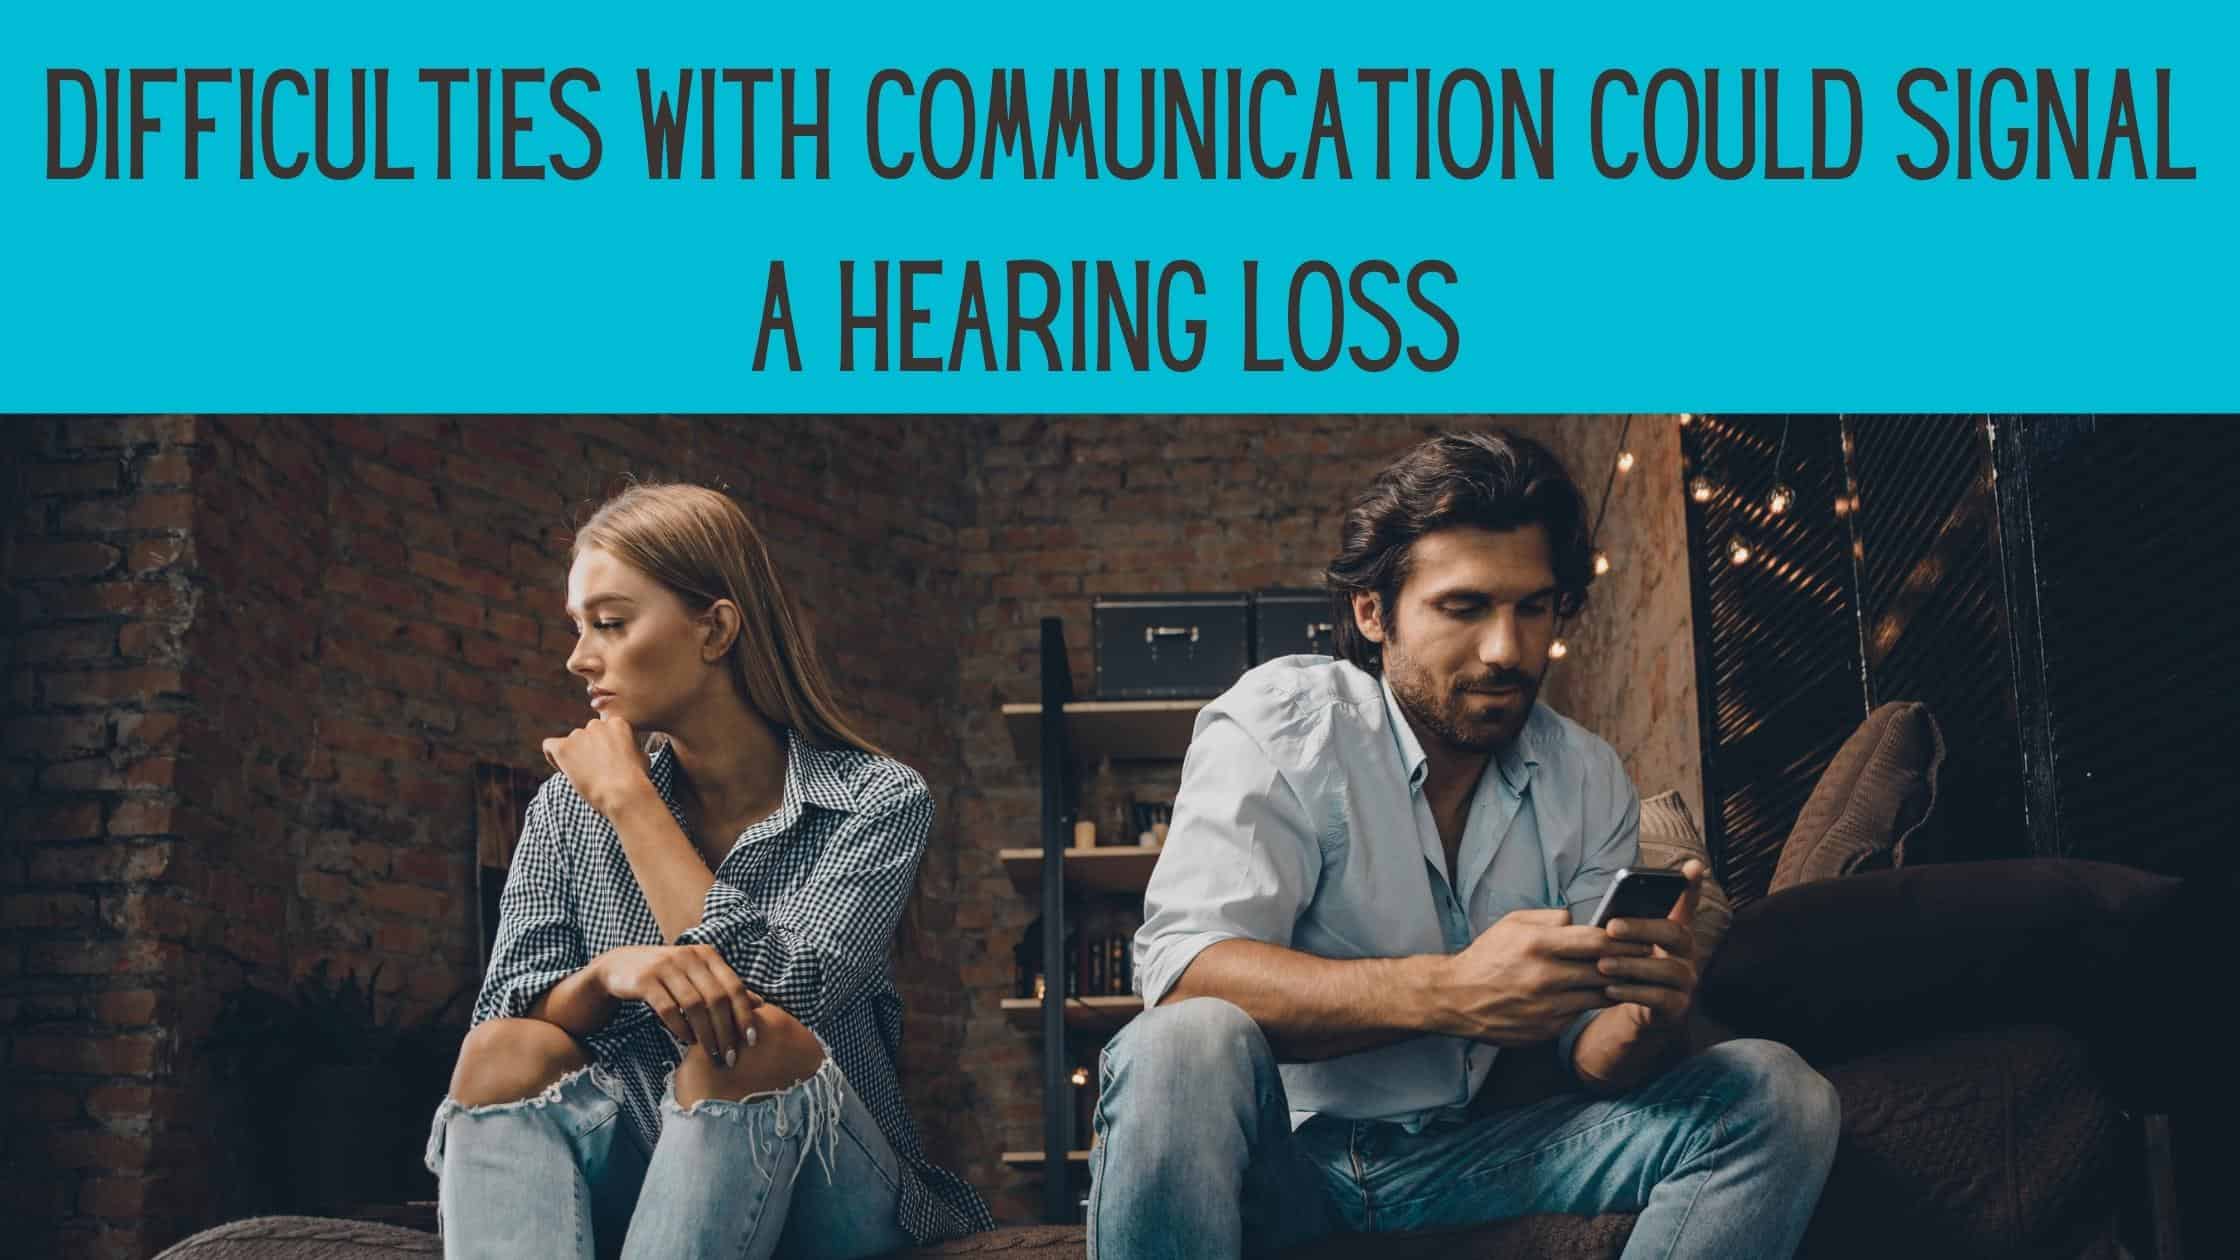 Featured image for “Difficulties with Communication Could Signal Hearing Loss”